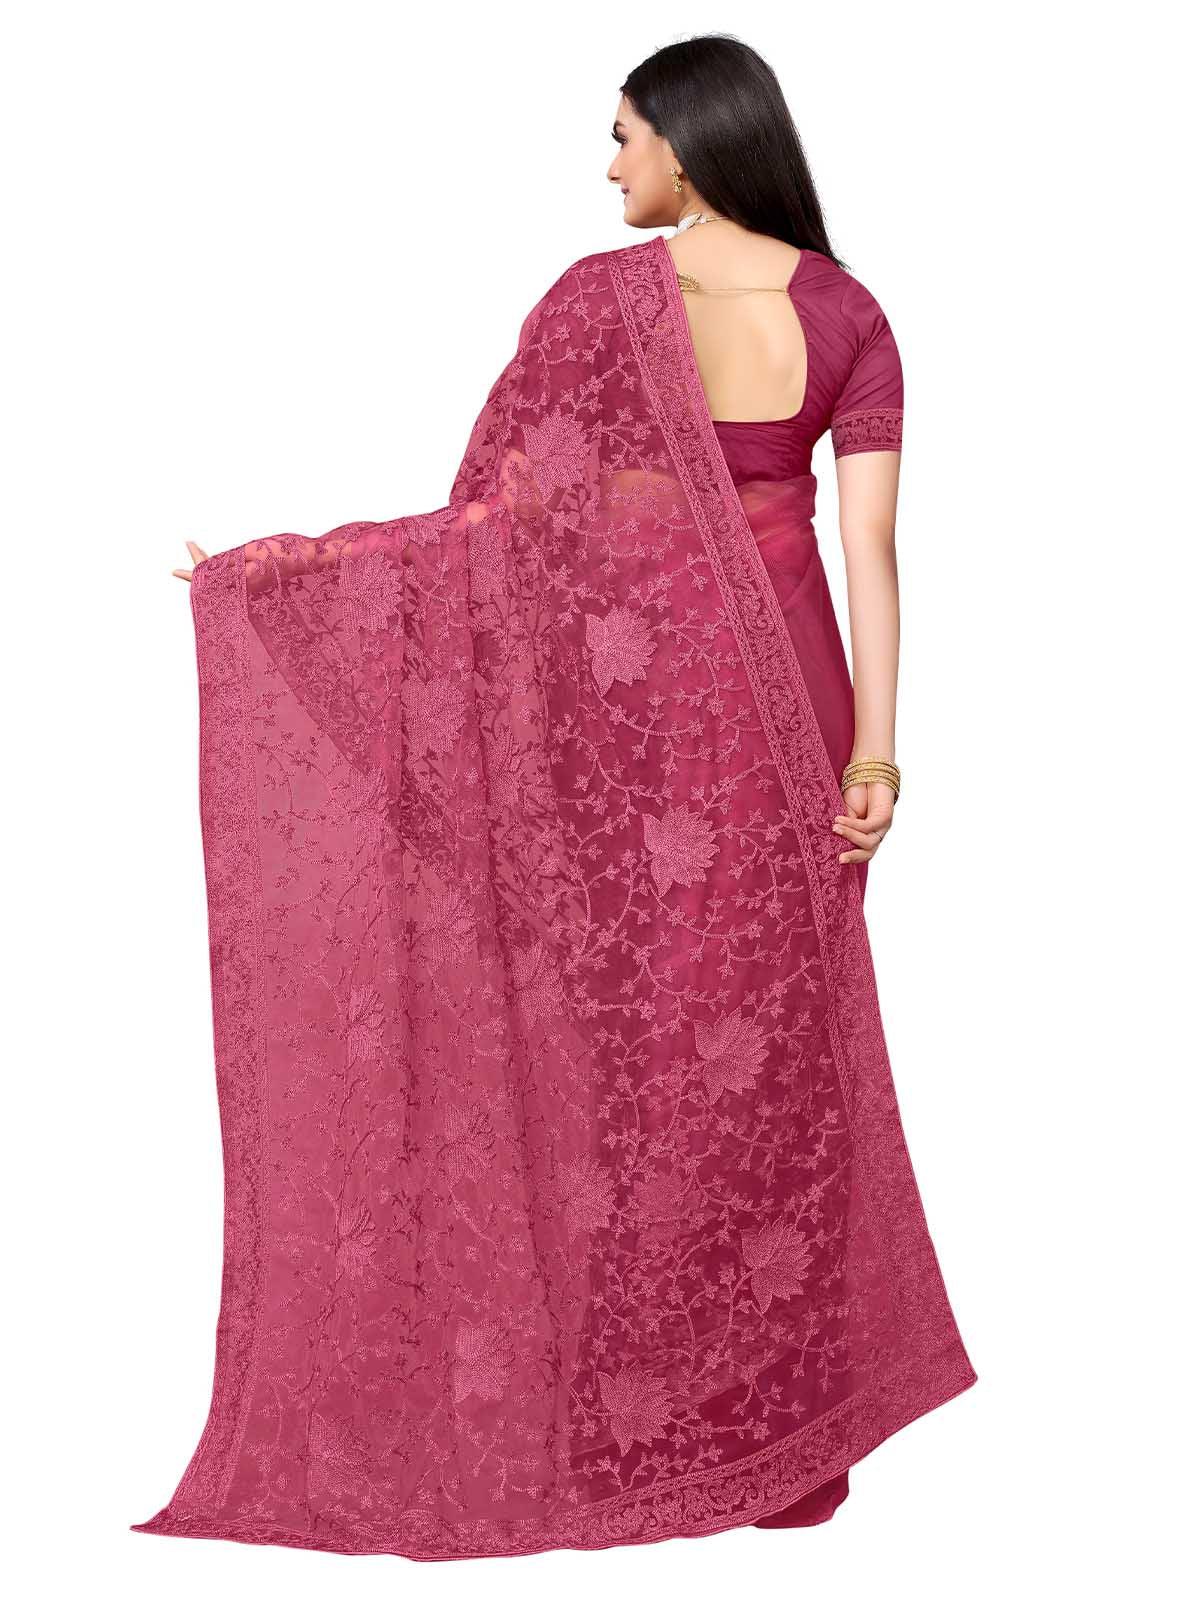 Women's Rust Red Net Embroidered Saree With Blouse - Odette